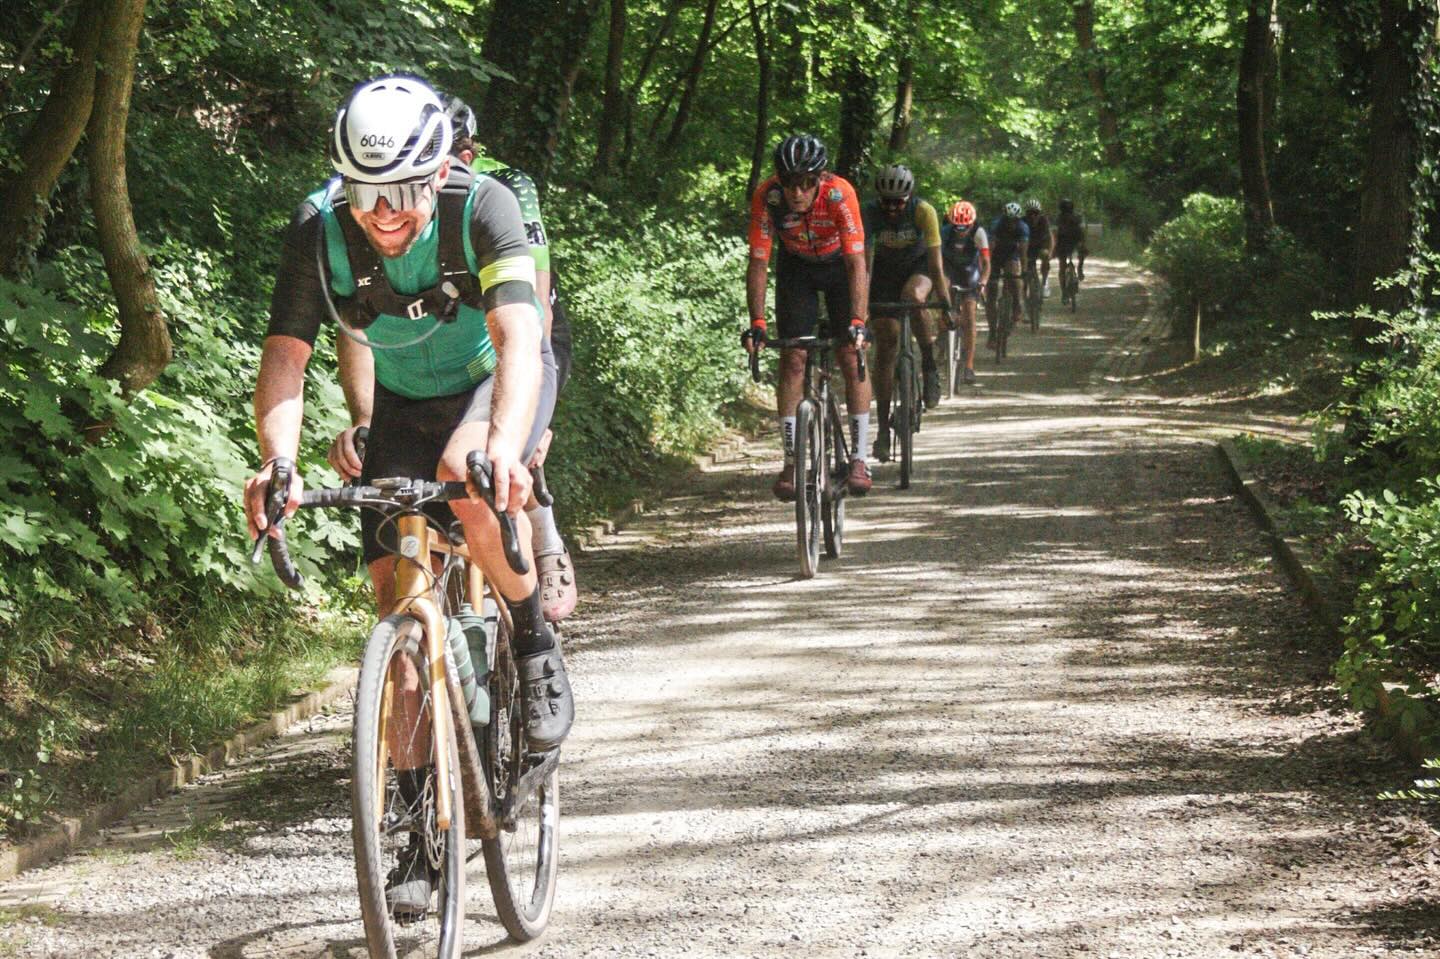 THE UCI GRAVEL SERIES.. what a blast!